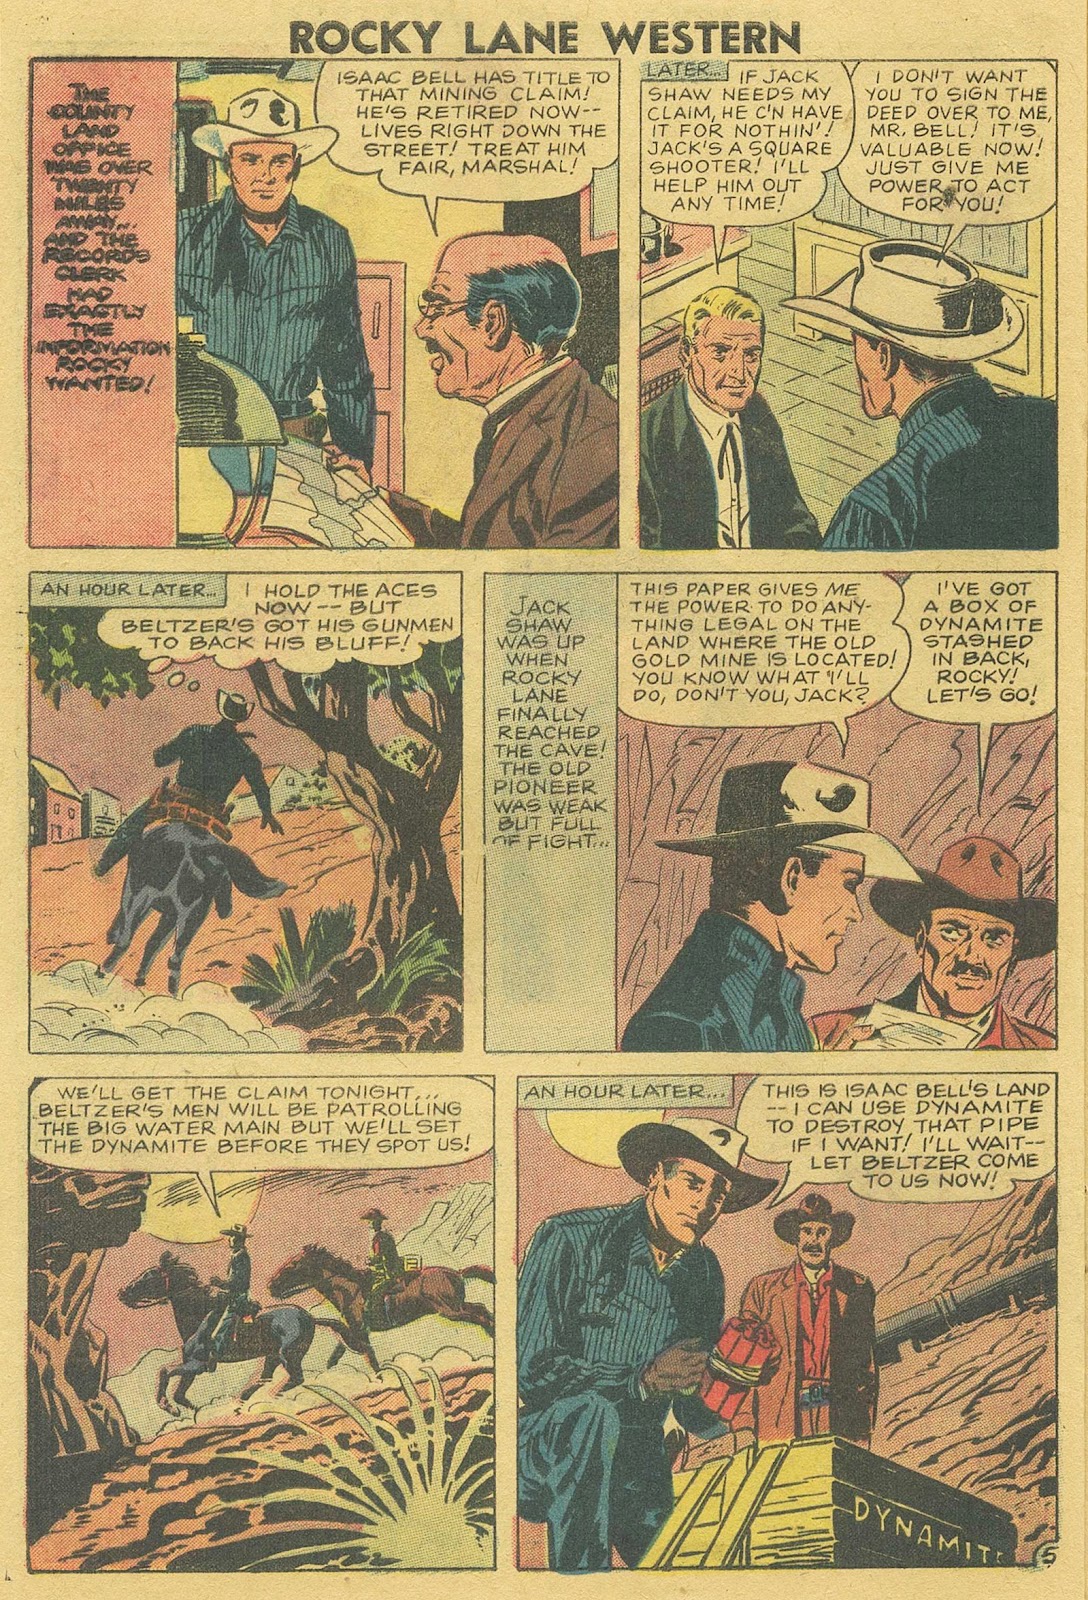 Rocky Lane Western (1954) issue 81 - Page 8